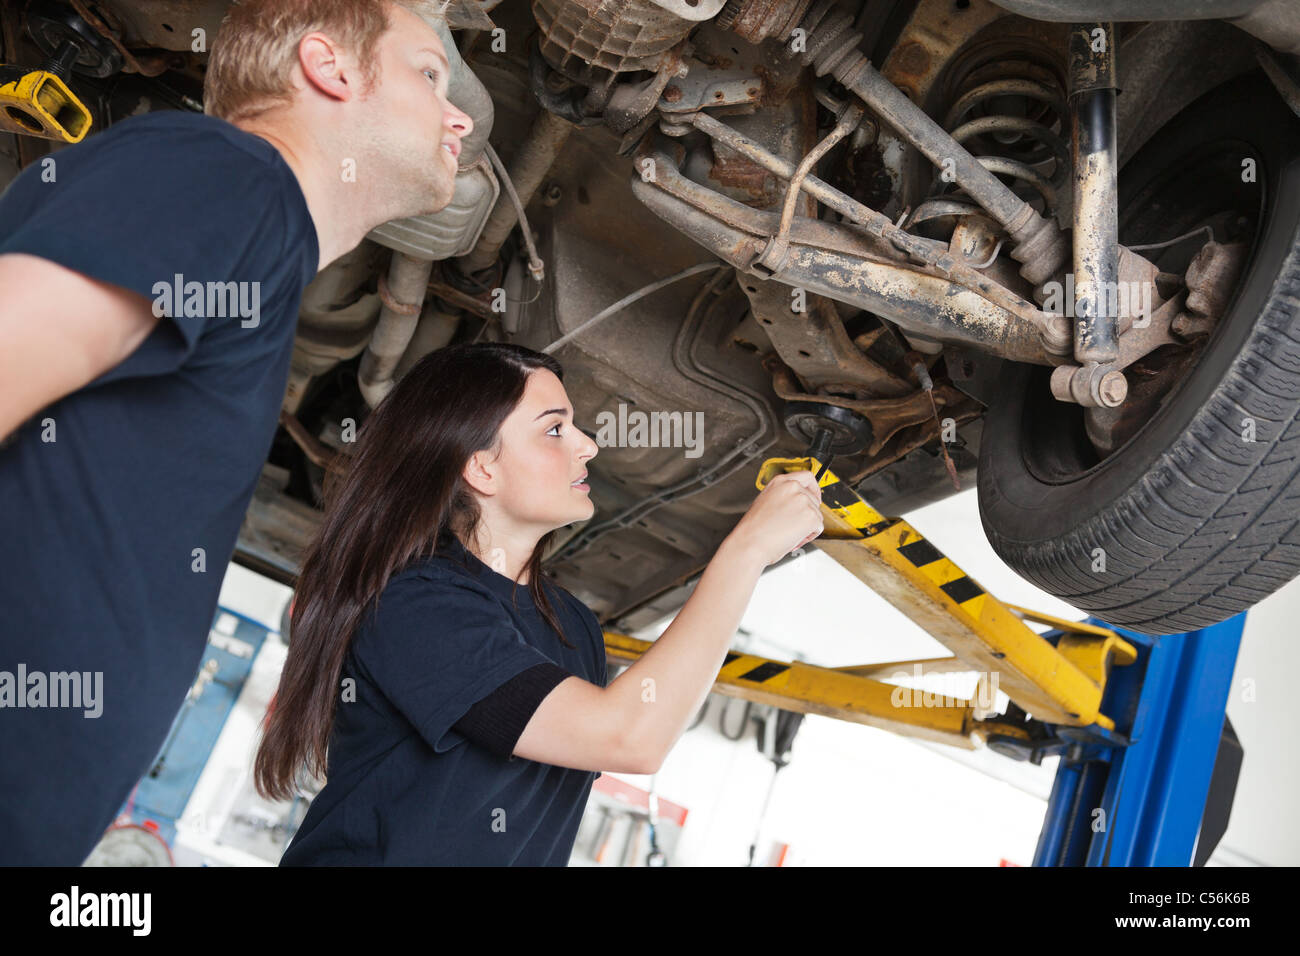 Two mechanics looking at a car discussing a problem Stock Photo